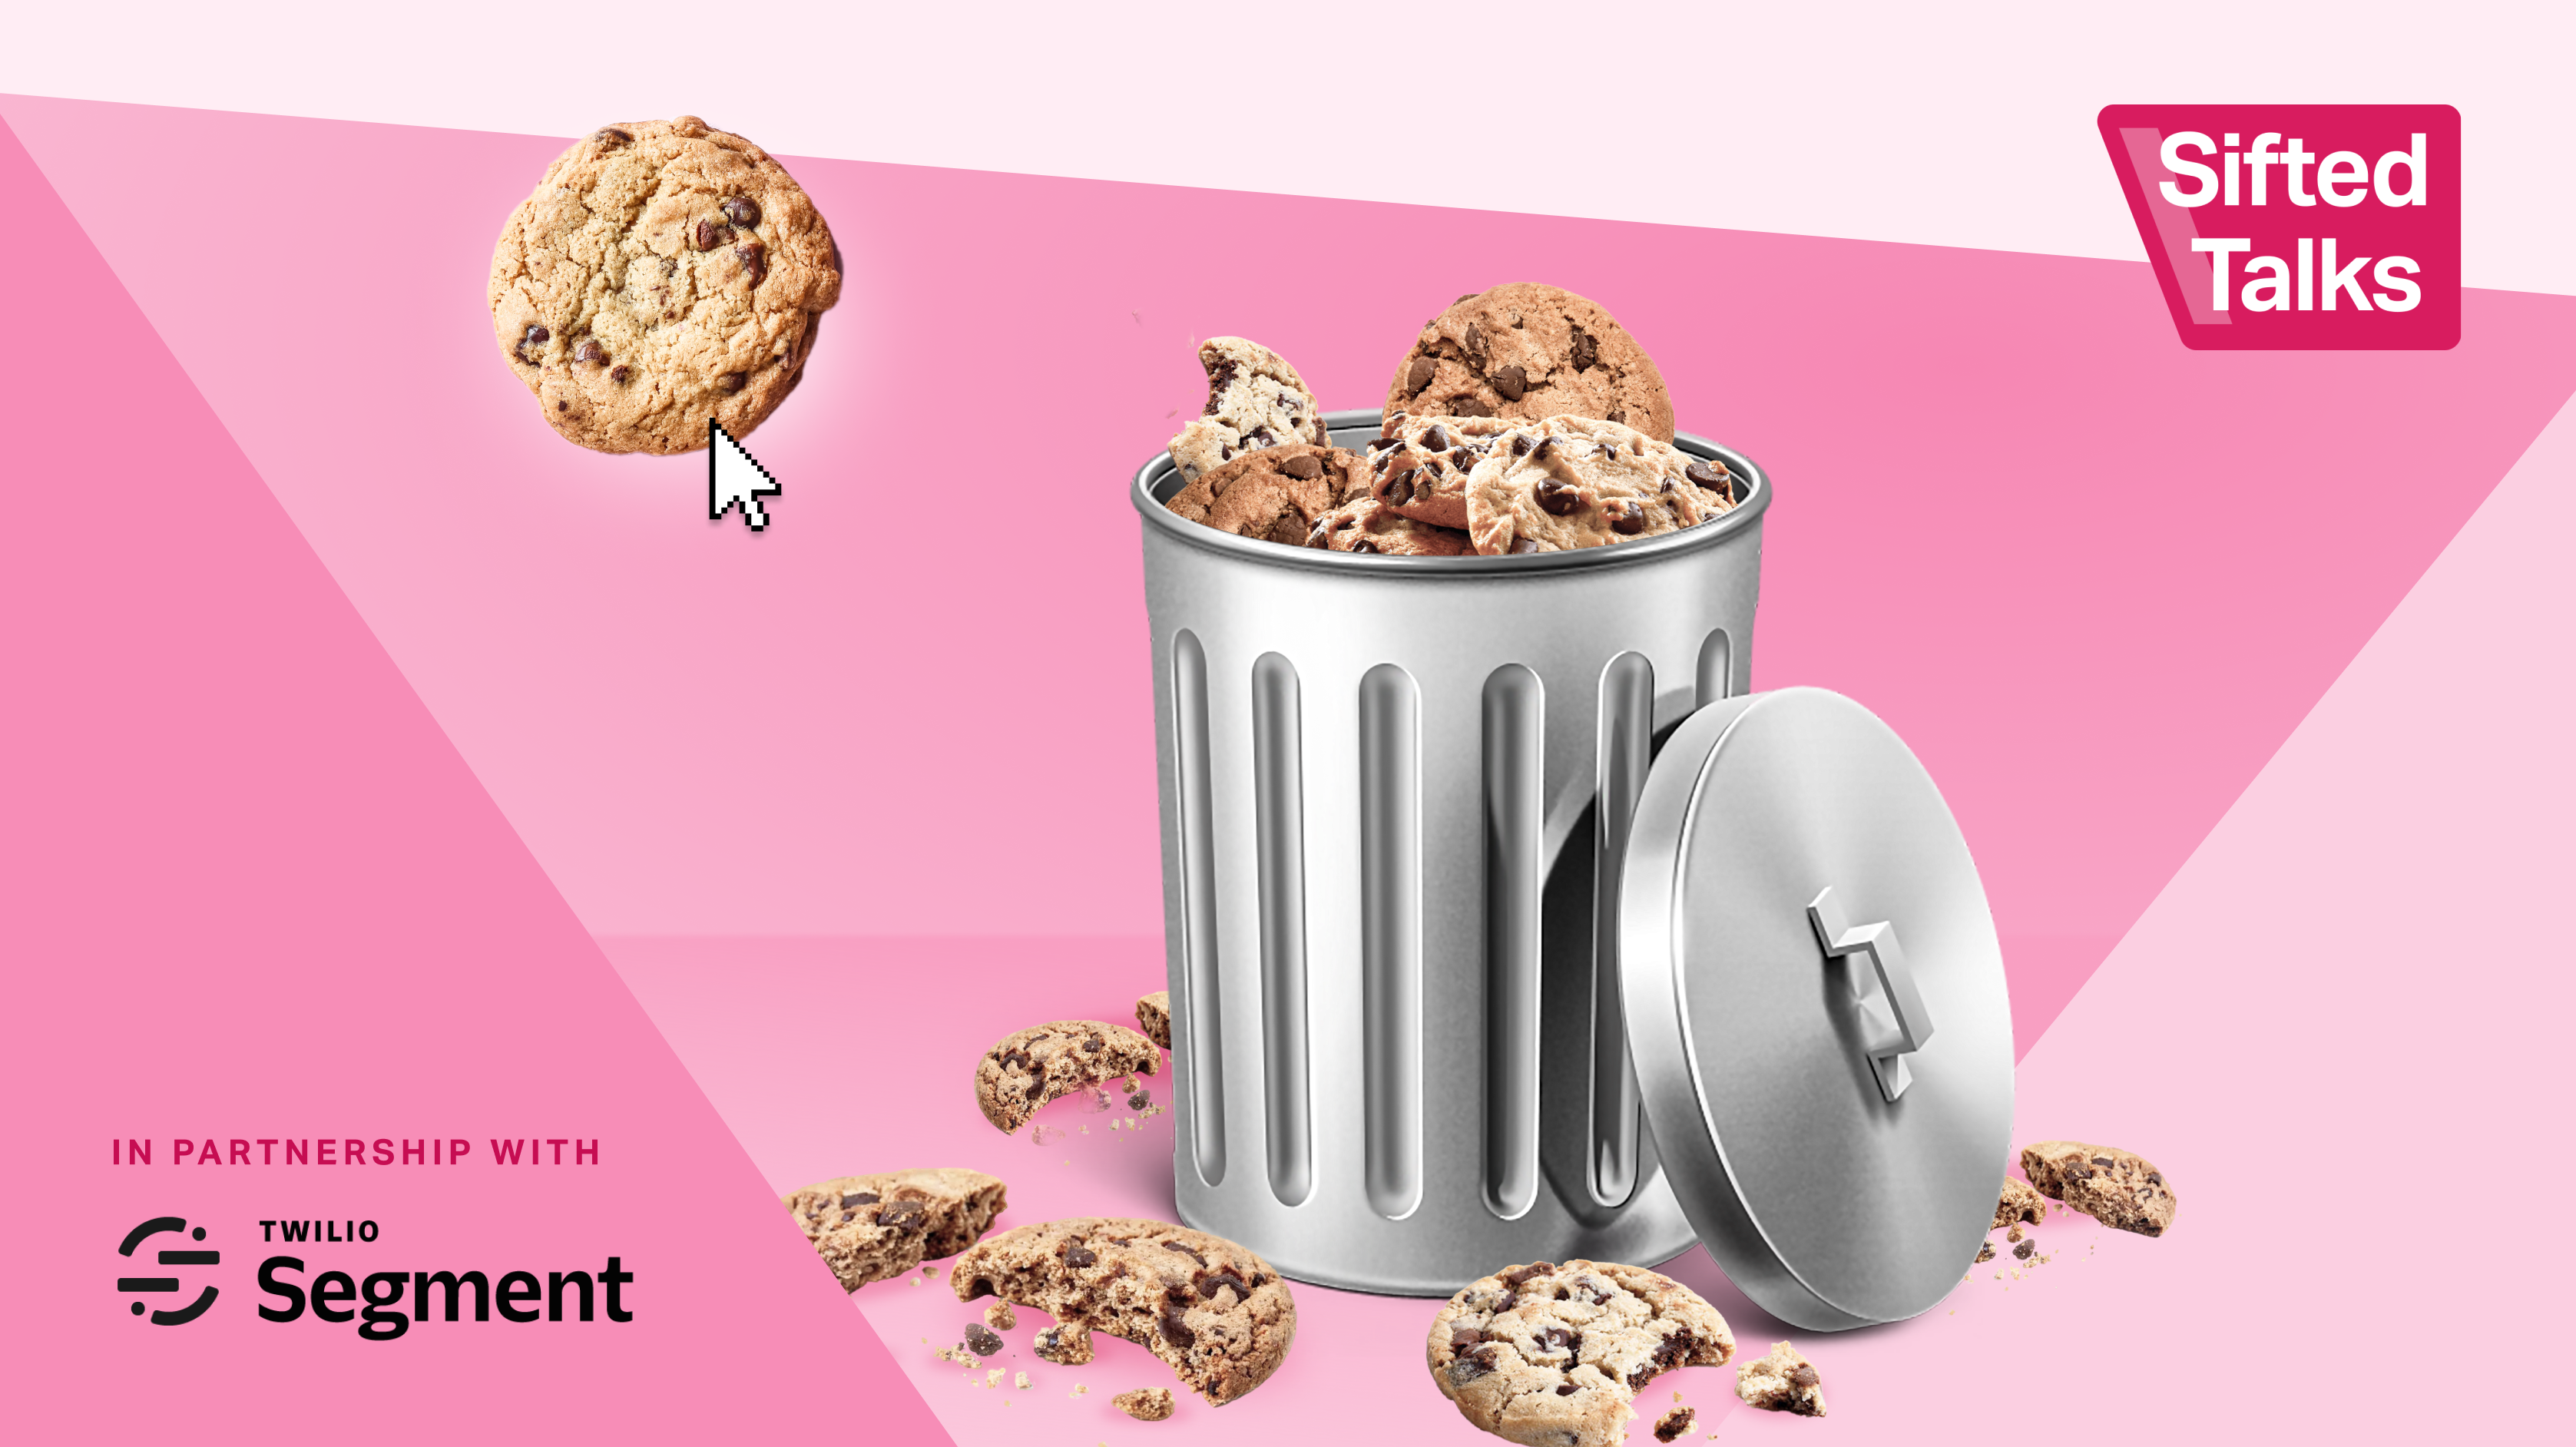 As the cookie crumbles, who’s picking up the data crumbs?